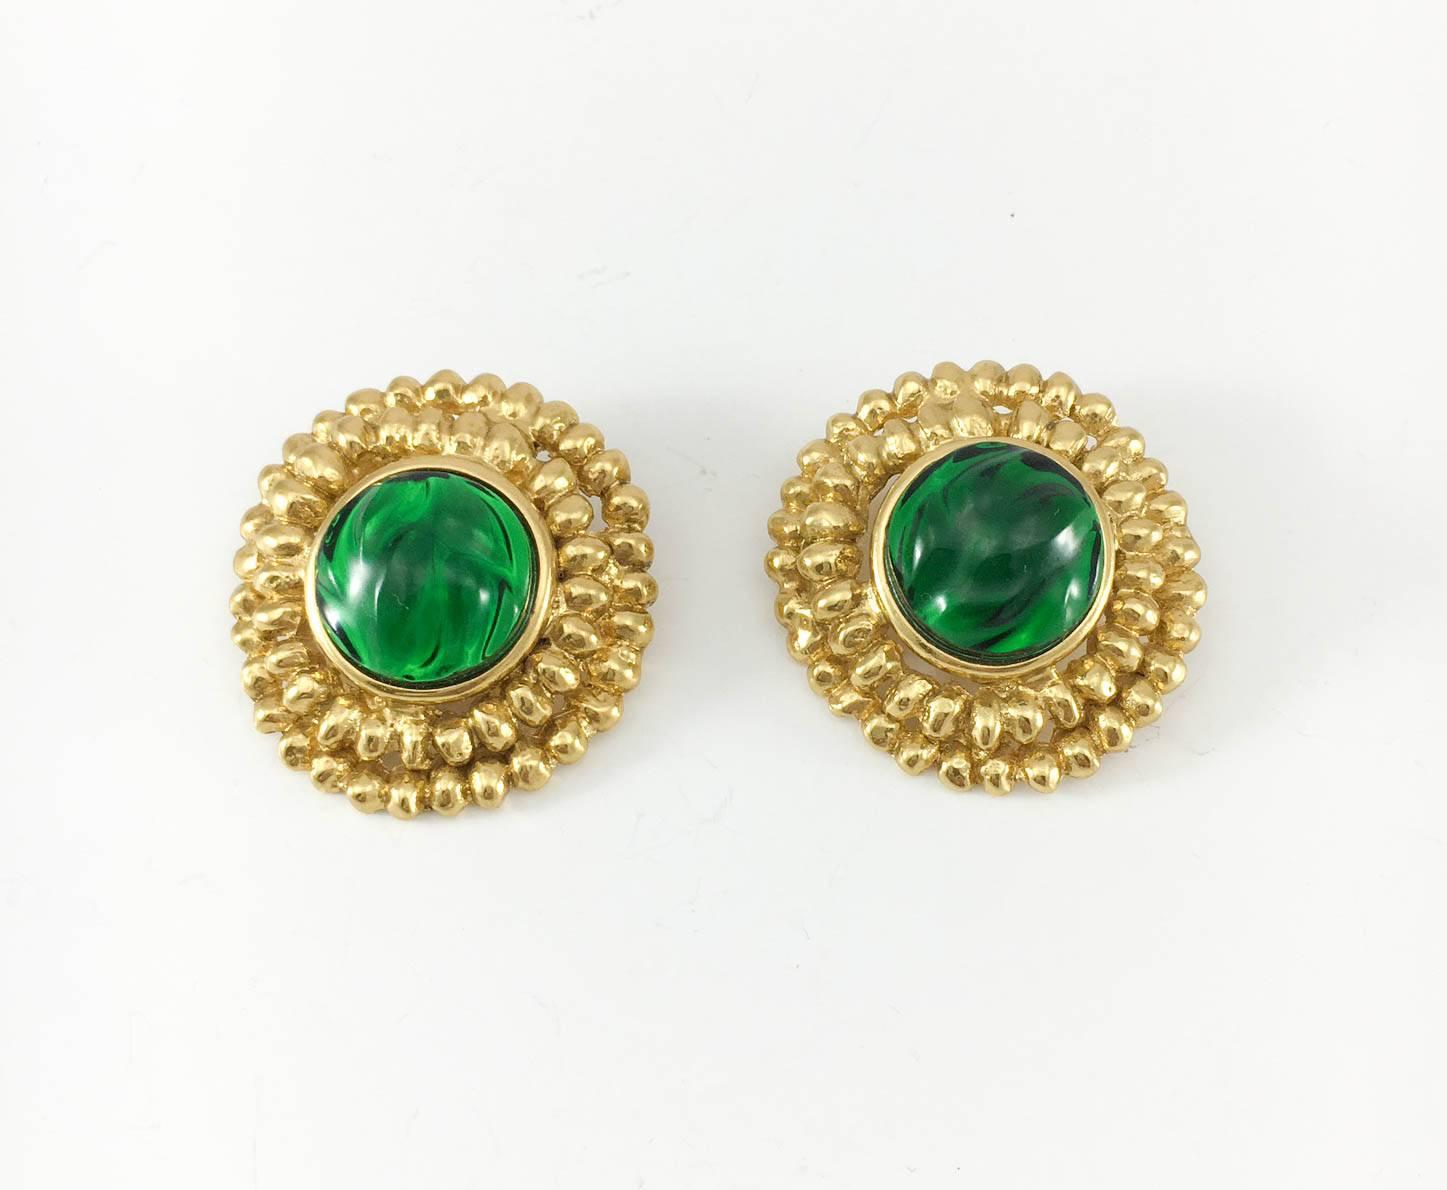 Vintage Yves Saint Laurent Gripoix Gold-Plated Clip-on Earring. These gorgeous Yves Saint Laurent earrings by Robert Goossens are gold-plated and feature deep emerald green Gripoix (poured glass) resembling the Byzantine look. These earrings